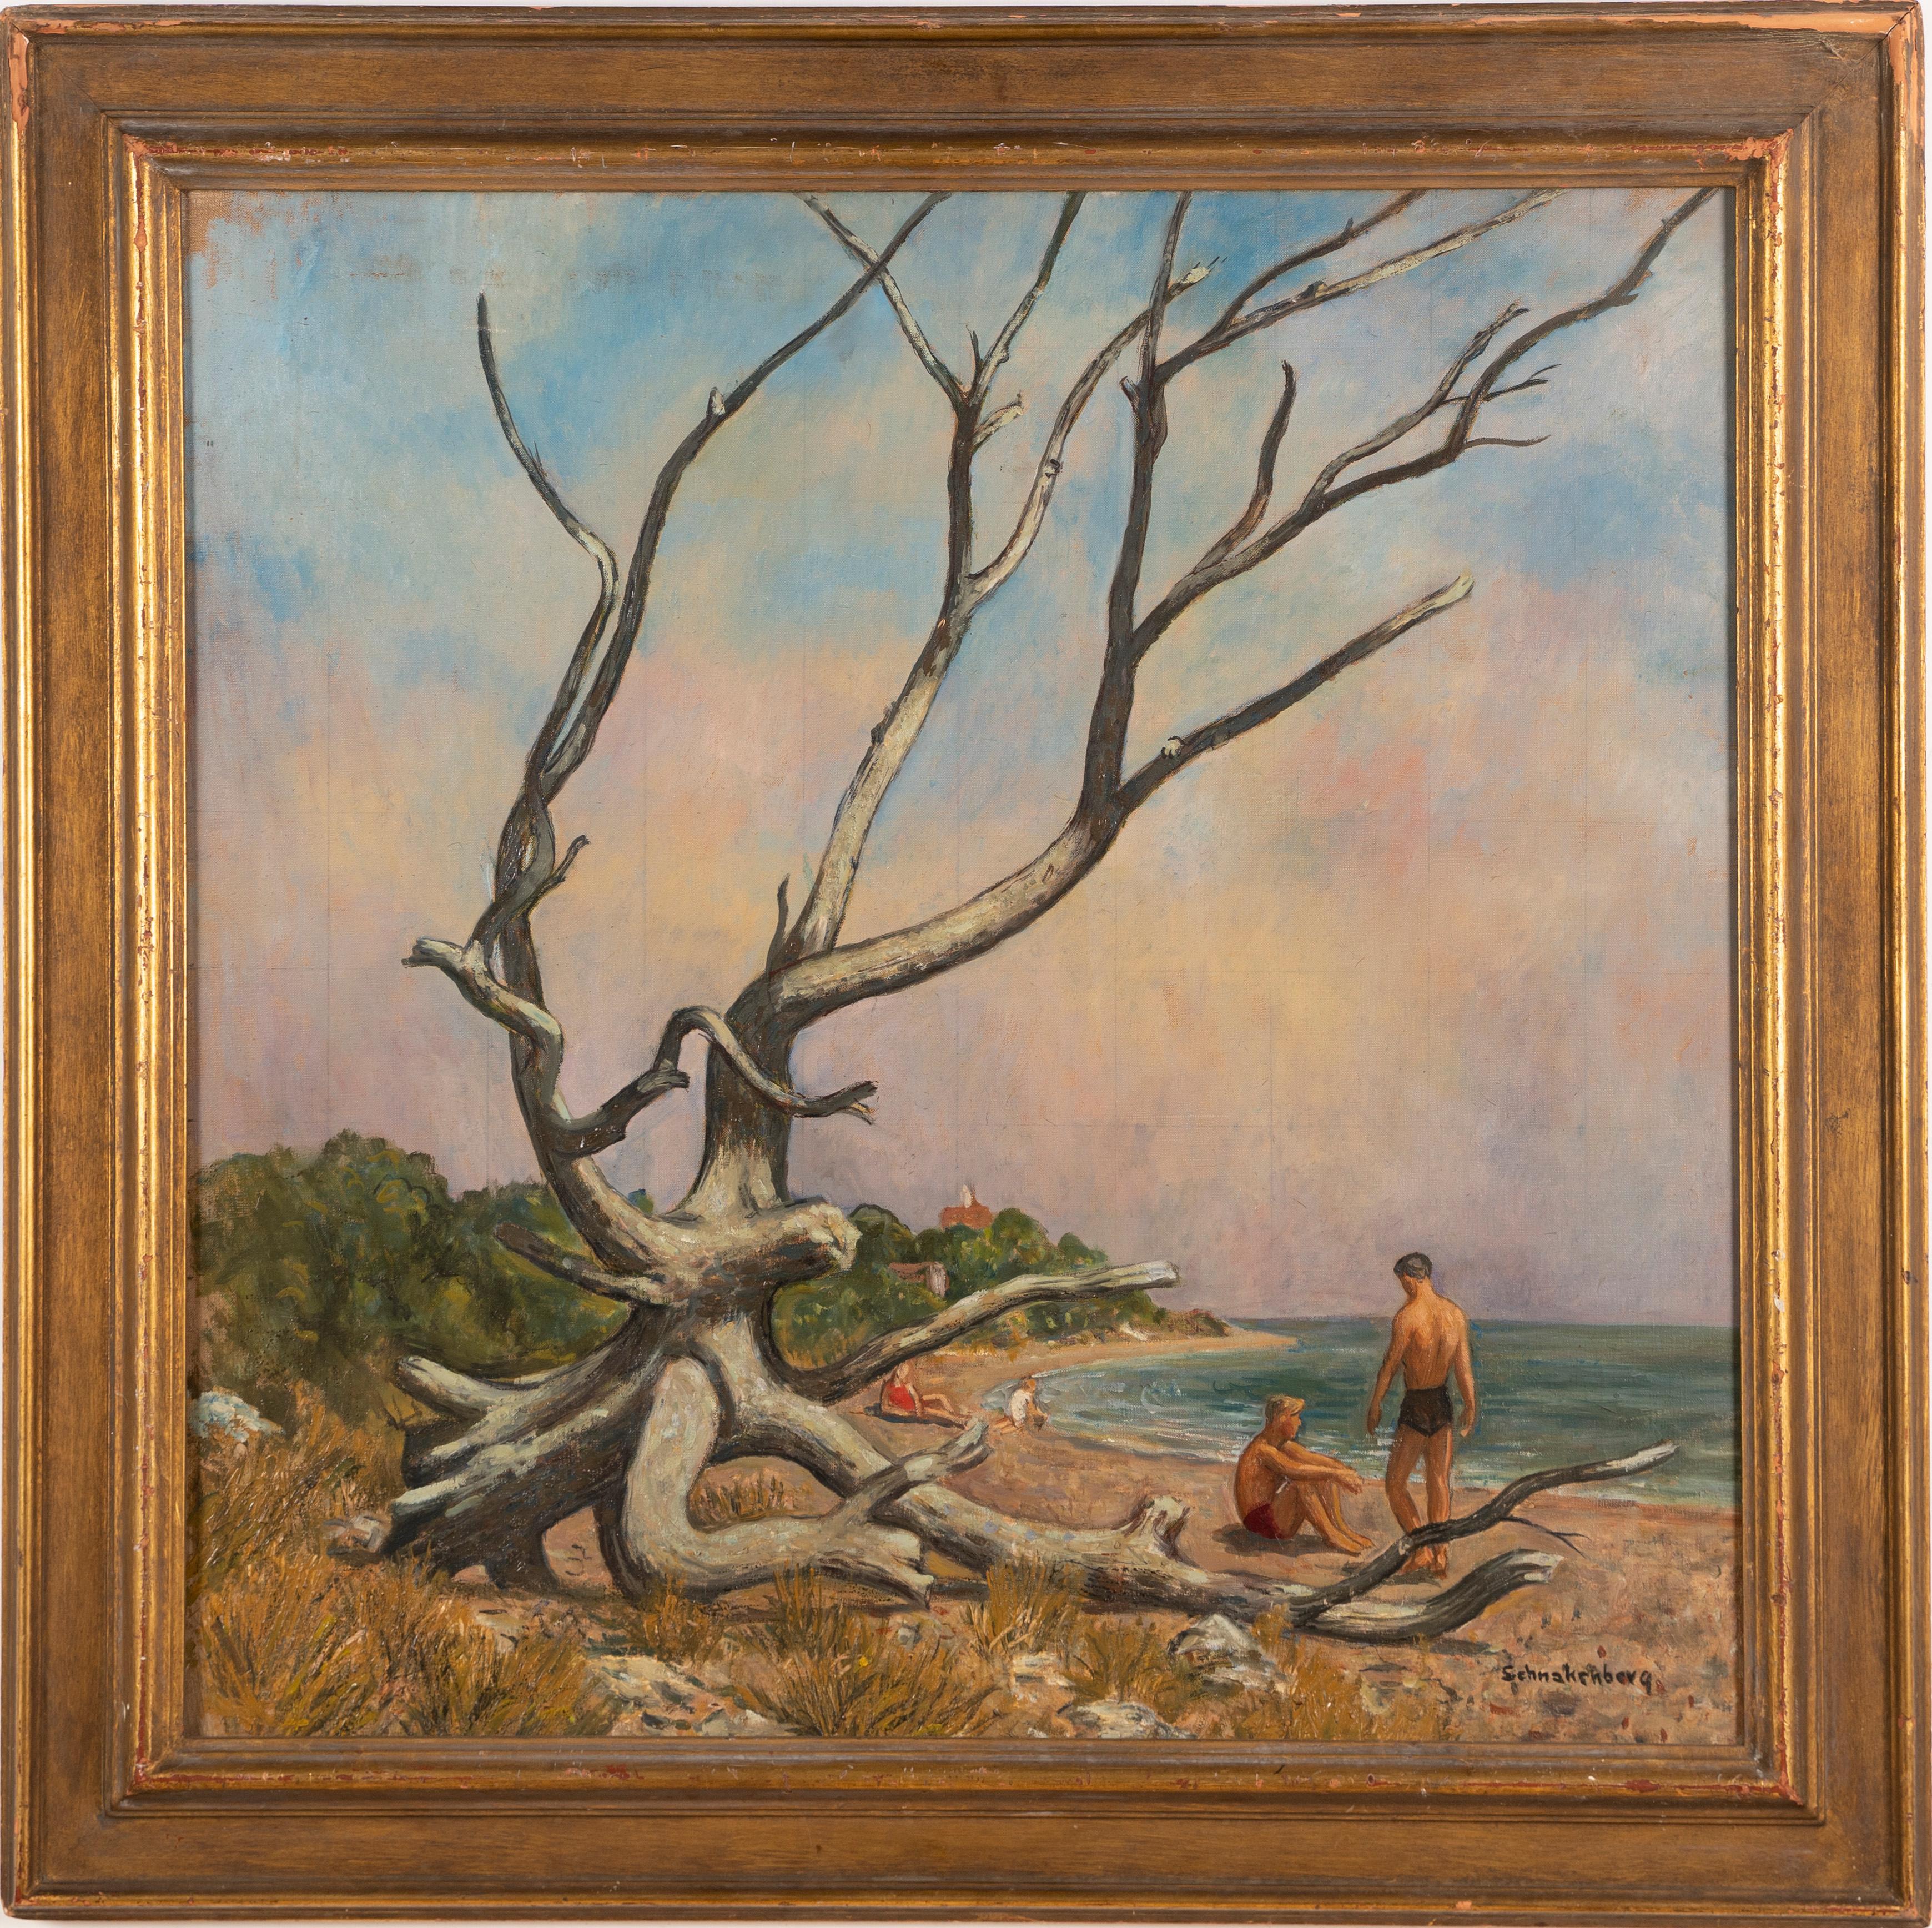 Antique American Modernist Male Beach Bather Large Signed Seascape Oil Painting 